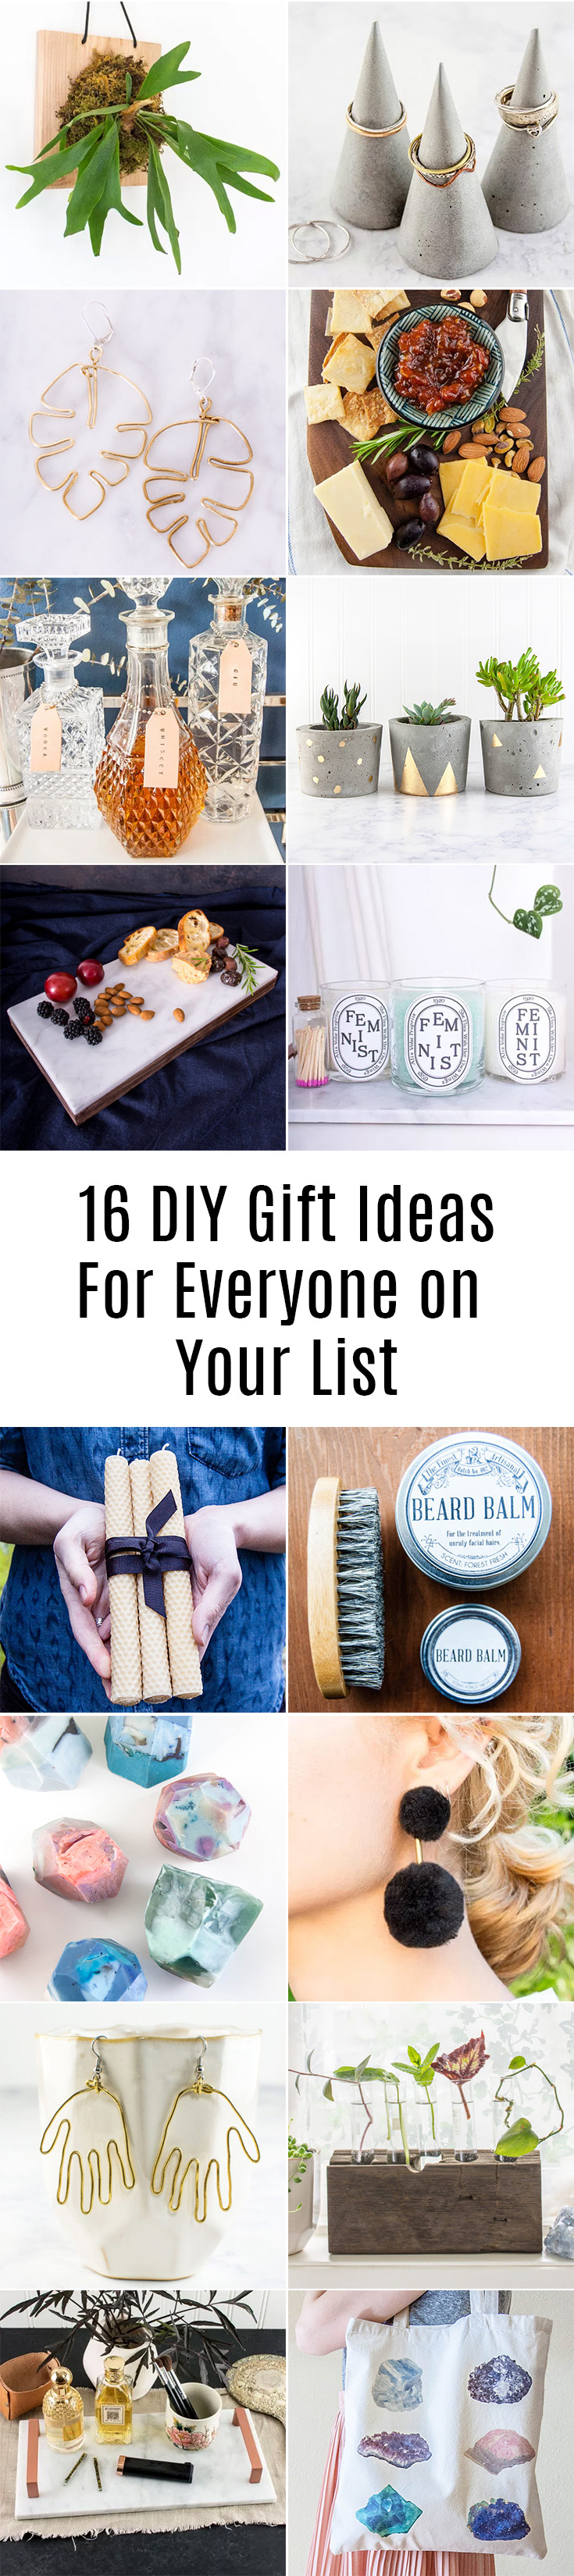 Want to DIY your gifts this year? Here are 16 tutorials for gifts you can make yourself. #DIY #GiftIdeas #christmas #holidays